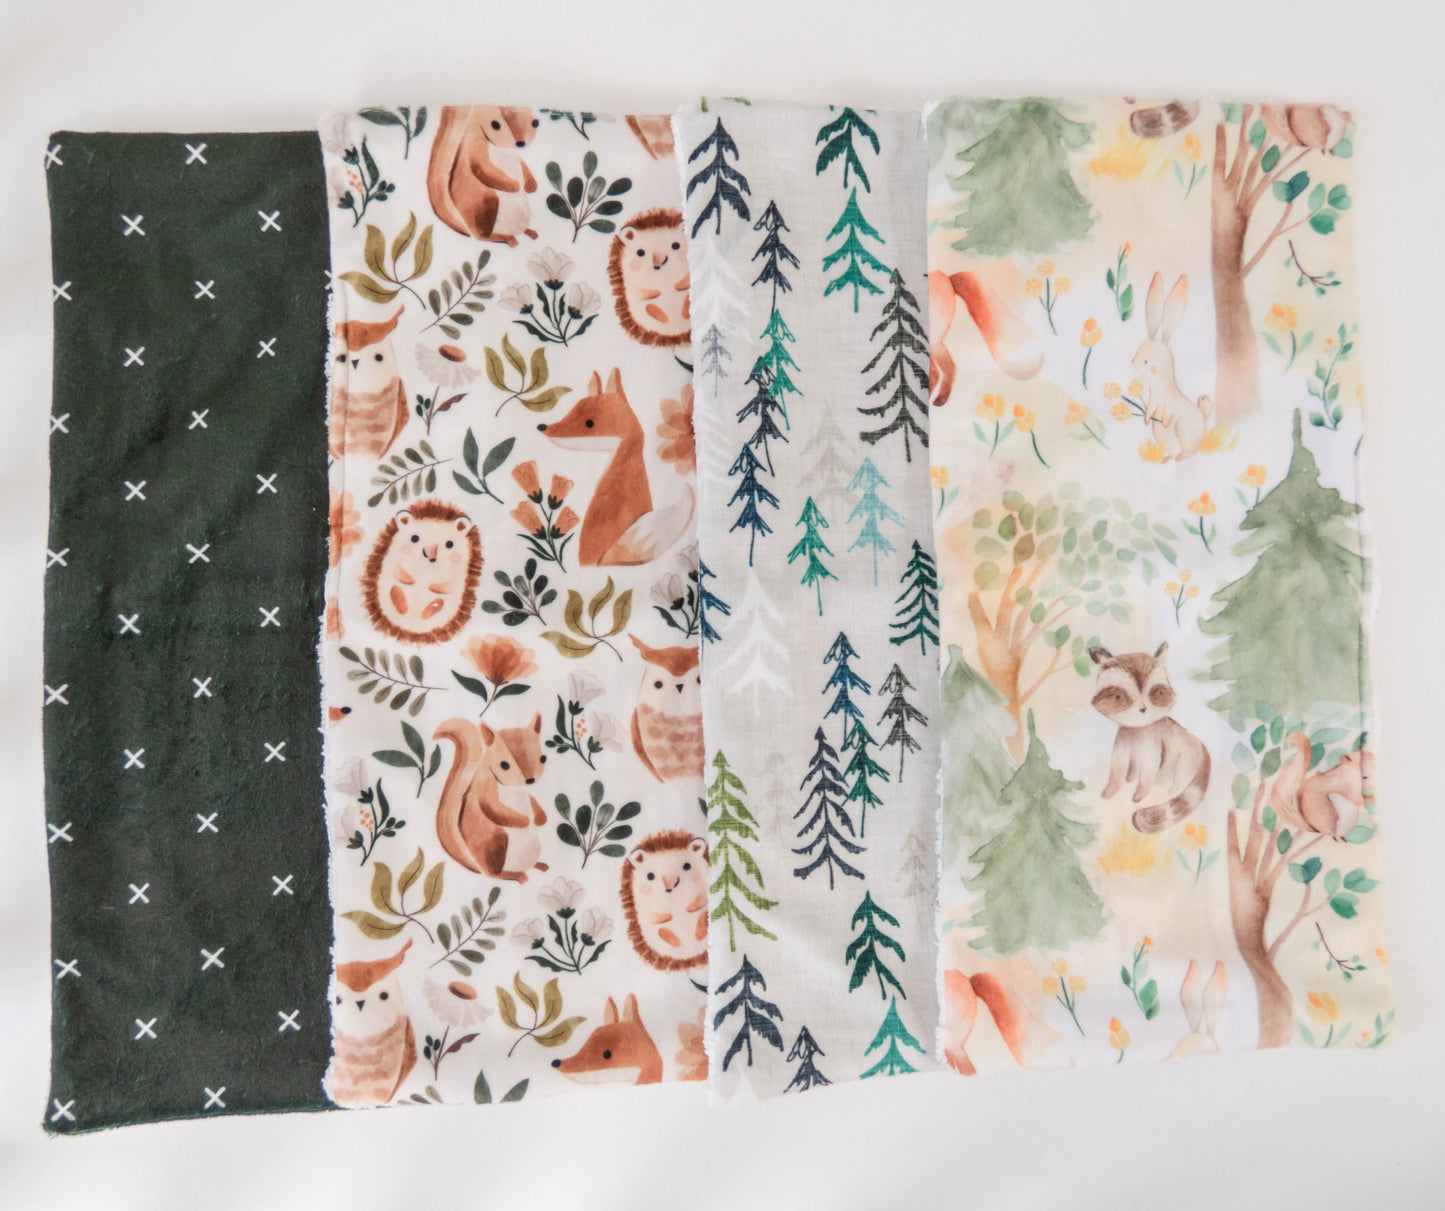 Burp Cloth Set of 4- Forest Animals, Green X's, Solitude Pines, and Animal Party